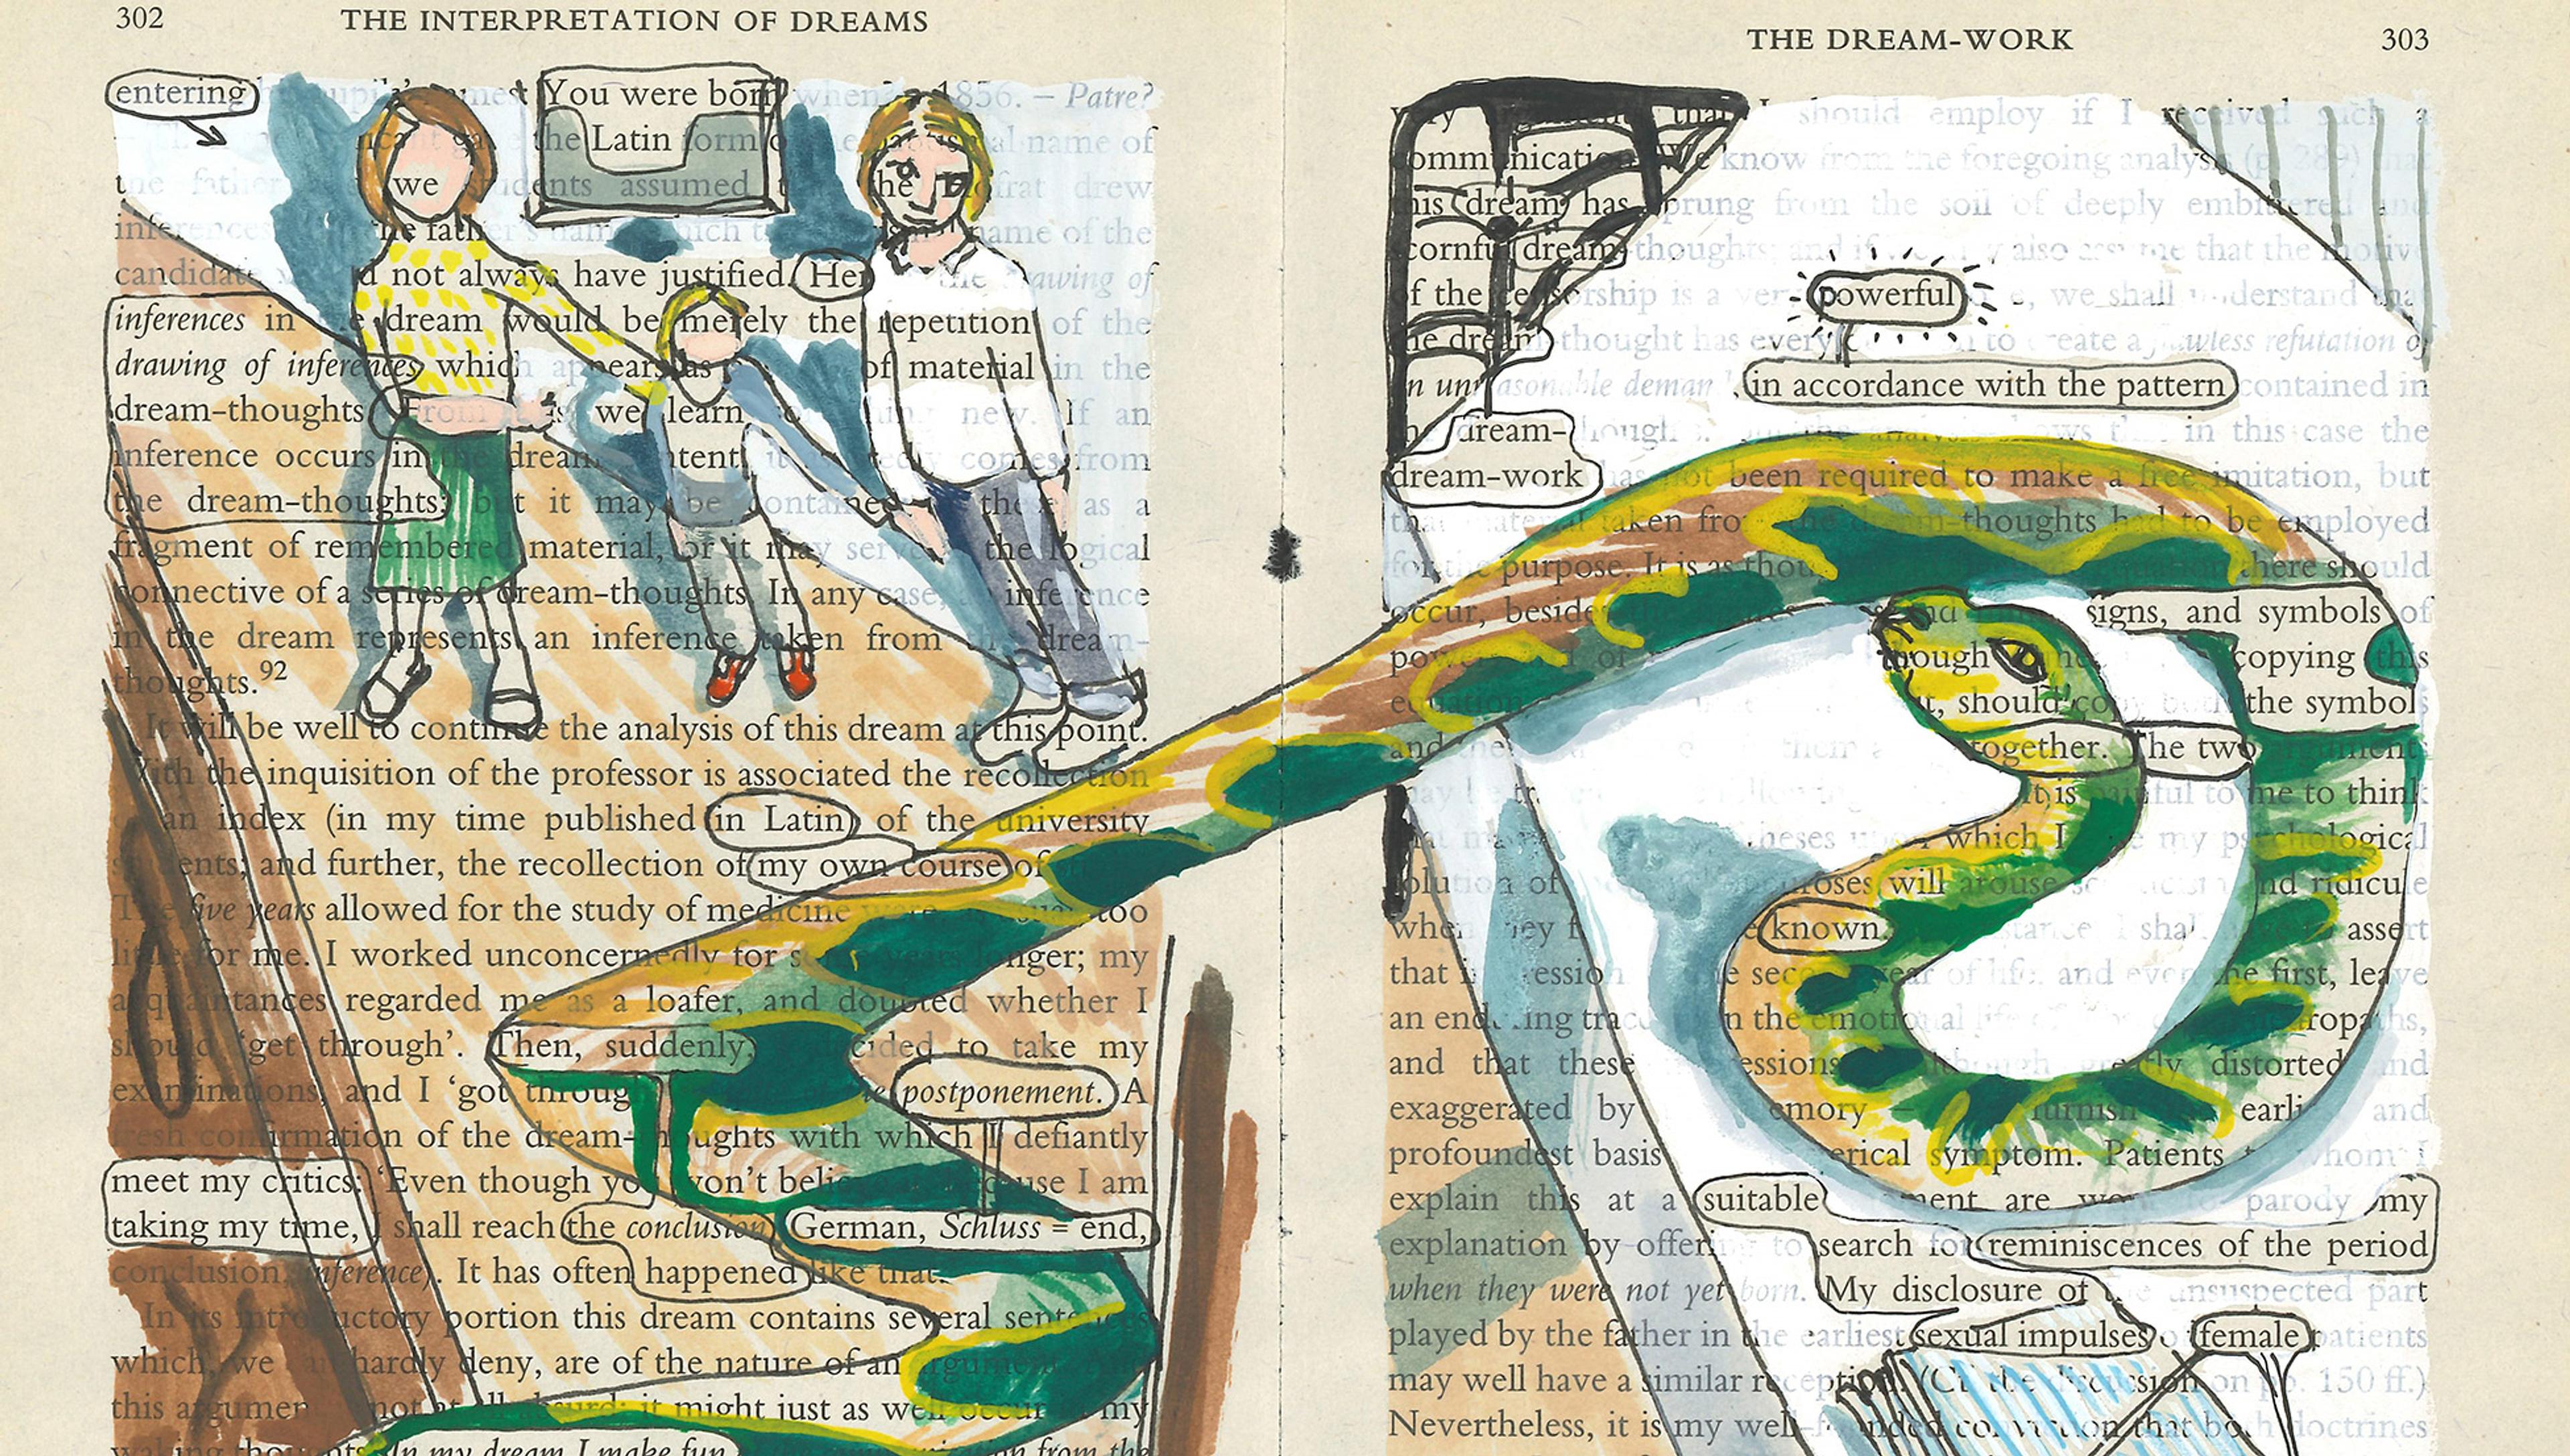 A family are drawn on the left hand page of an open copy of Freud’s book the Interpretation of dreams. On the right hand page is a drawing of ananaconda